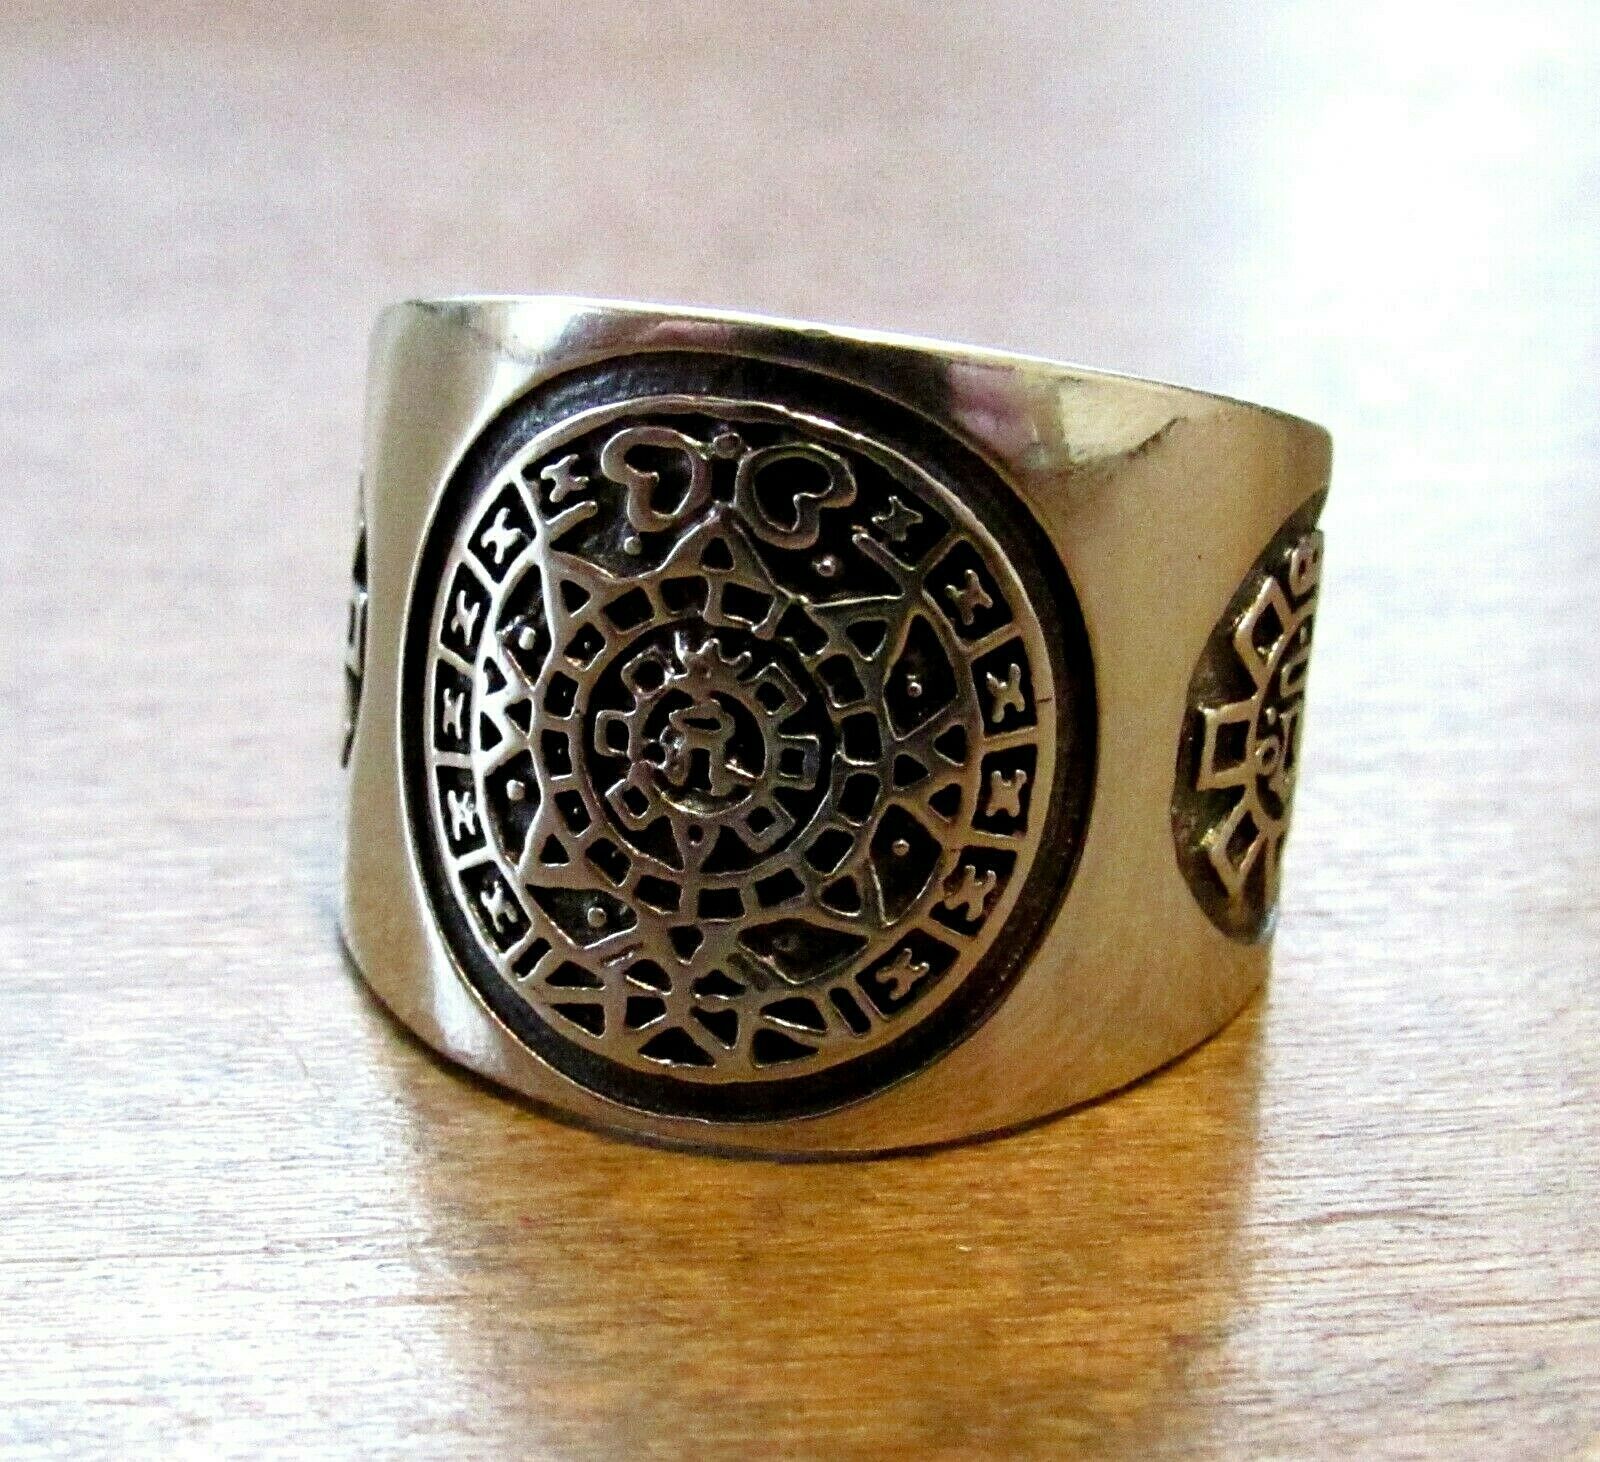 Renegade Jewelry - Handcrafted solid 925 sterling silver men's aztec / mayan calendar ring